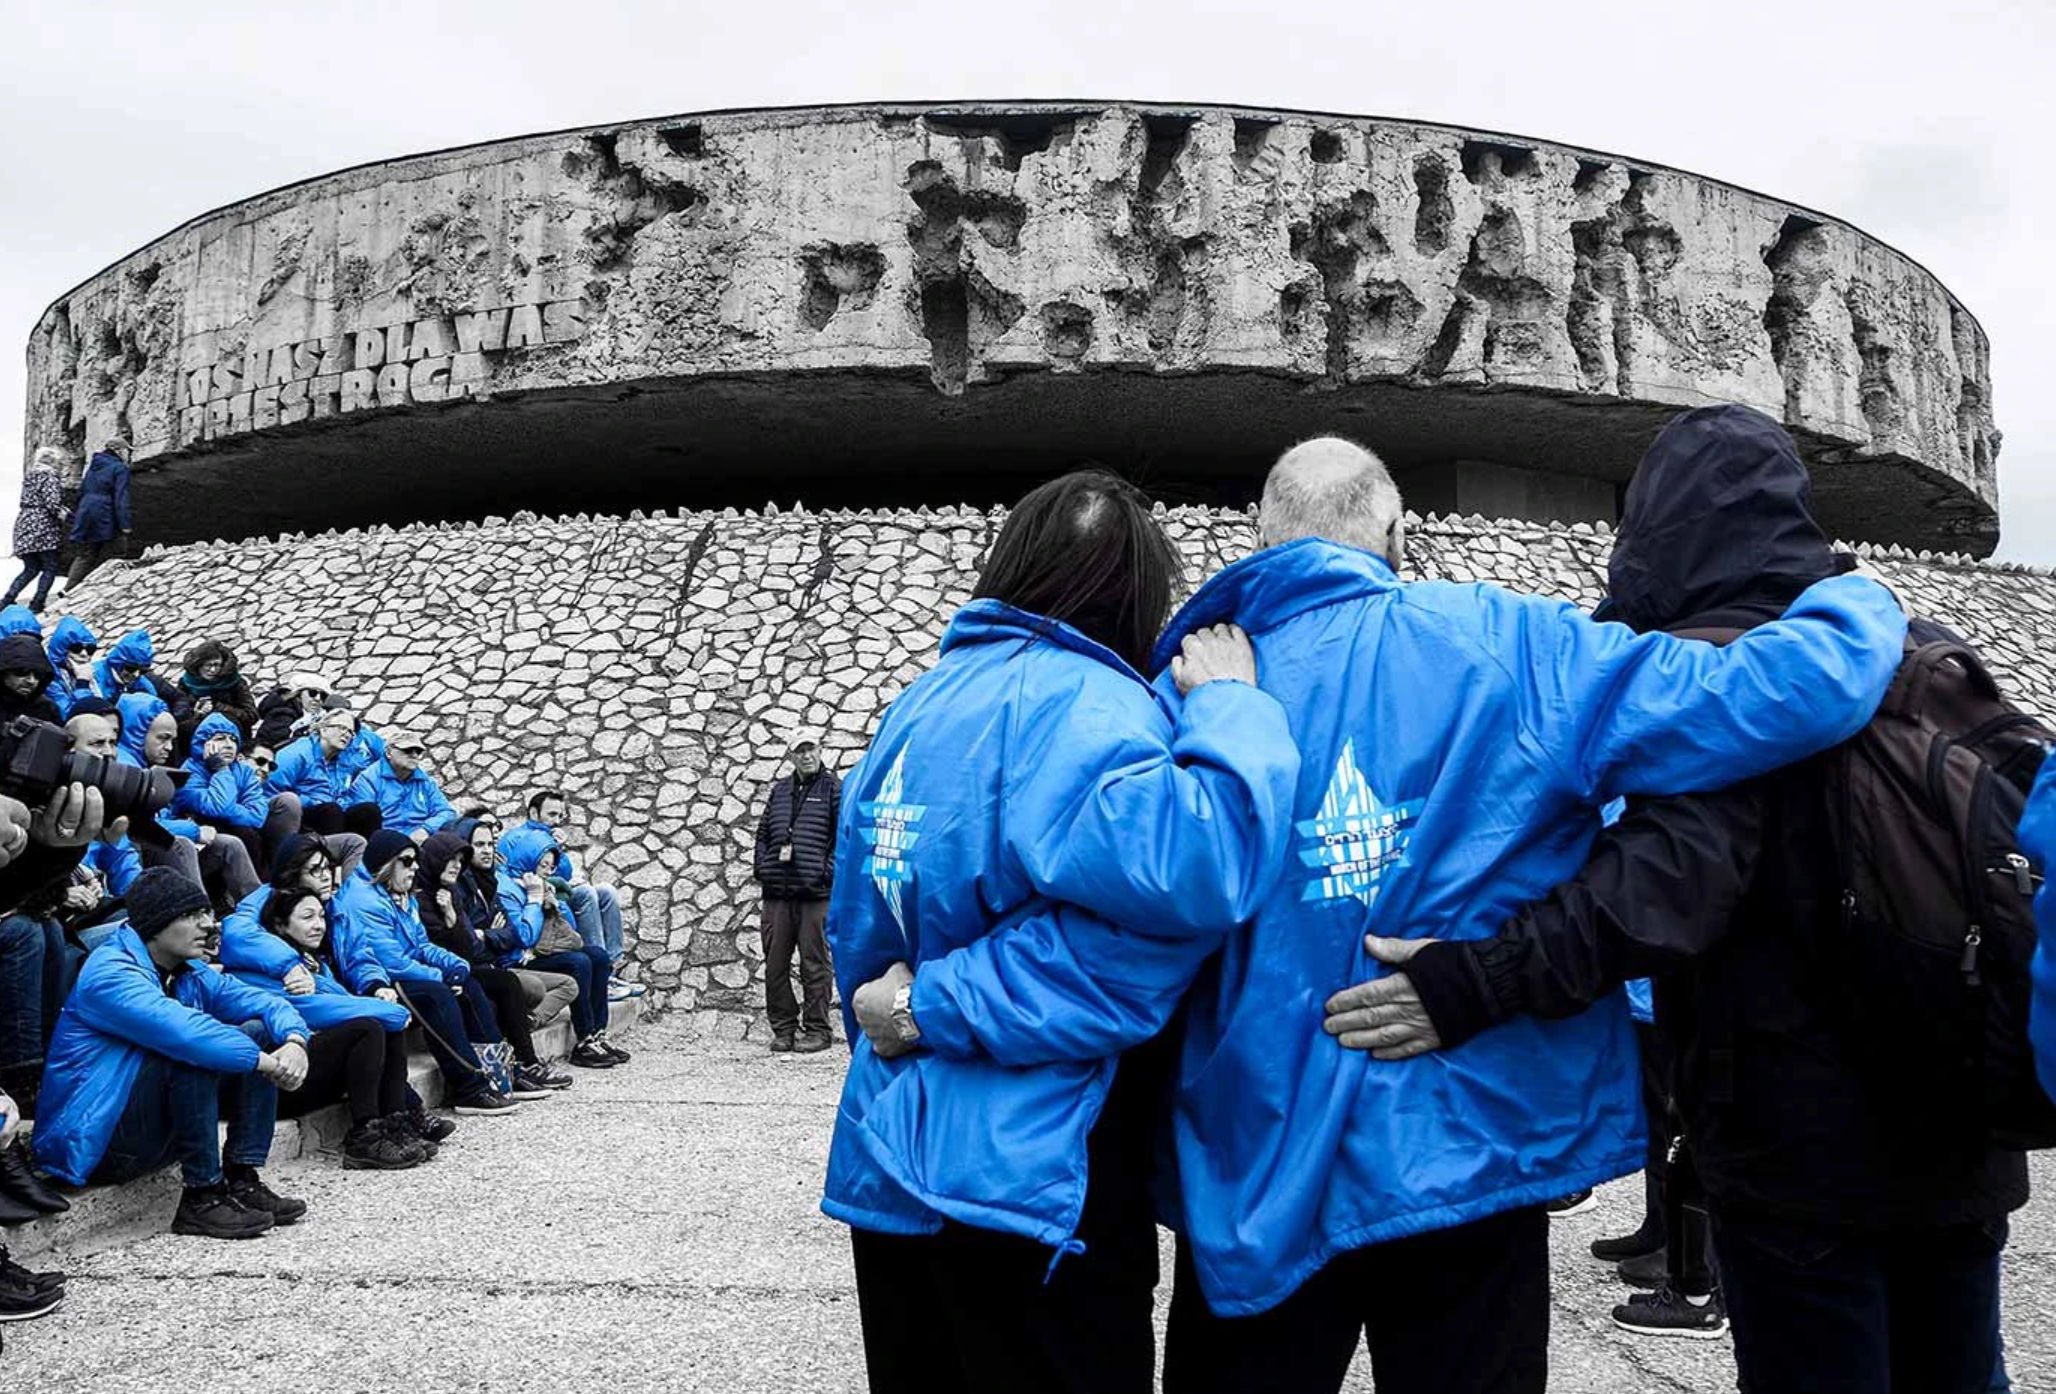 People in blue jackets in an otherwise black and white photograph. They are standing with arms around each other in front of a large memorial with a Polish motto.